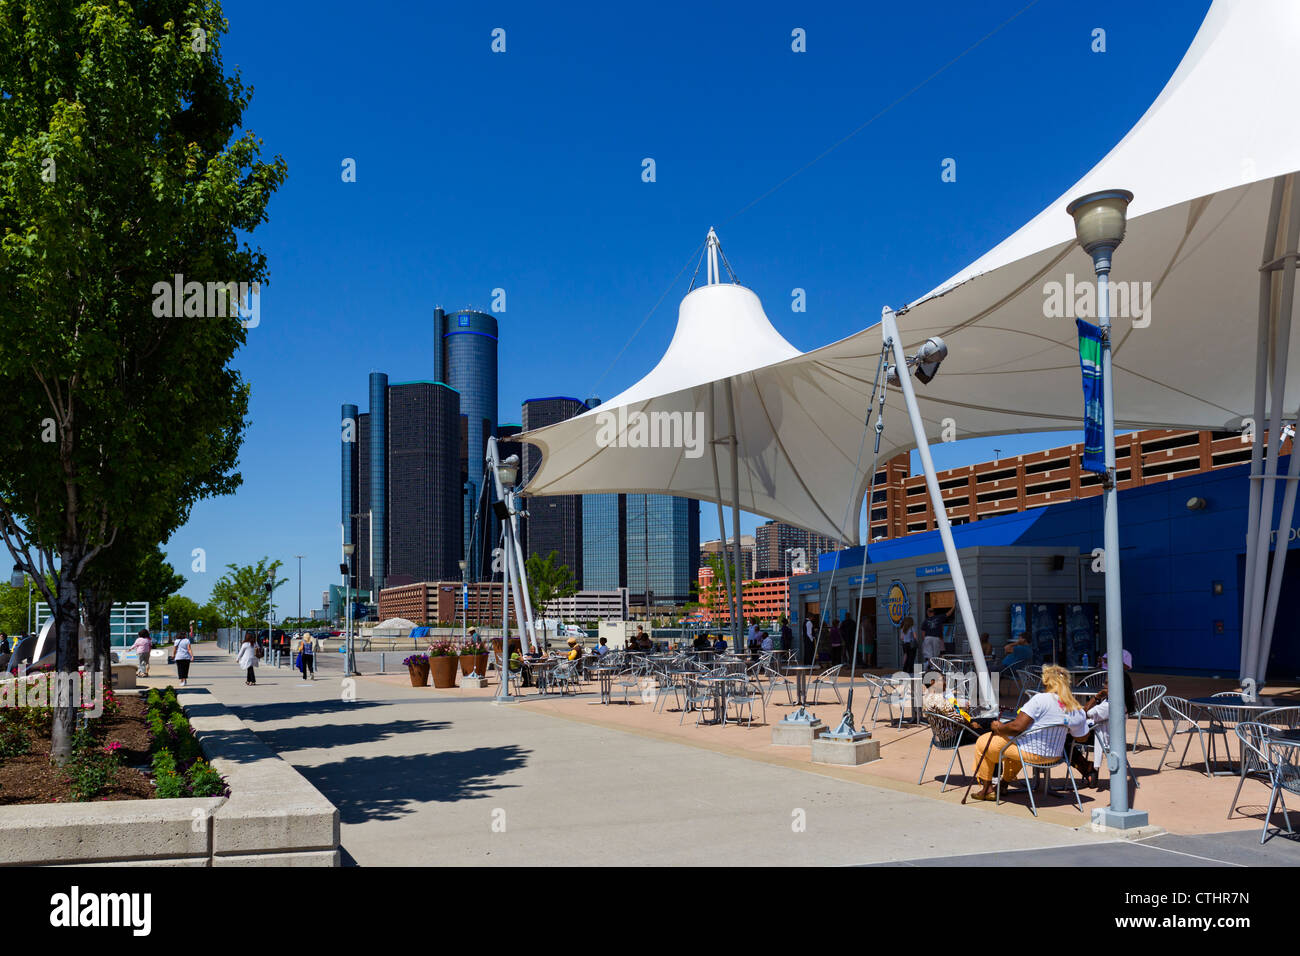 The Riverwalk Cafe in Rivard Plaza with the Renaissance Center city skyline behind, Detroit, Michigan, USA Stock Photo